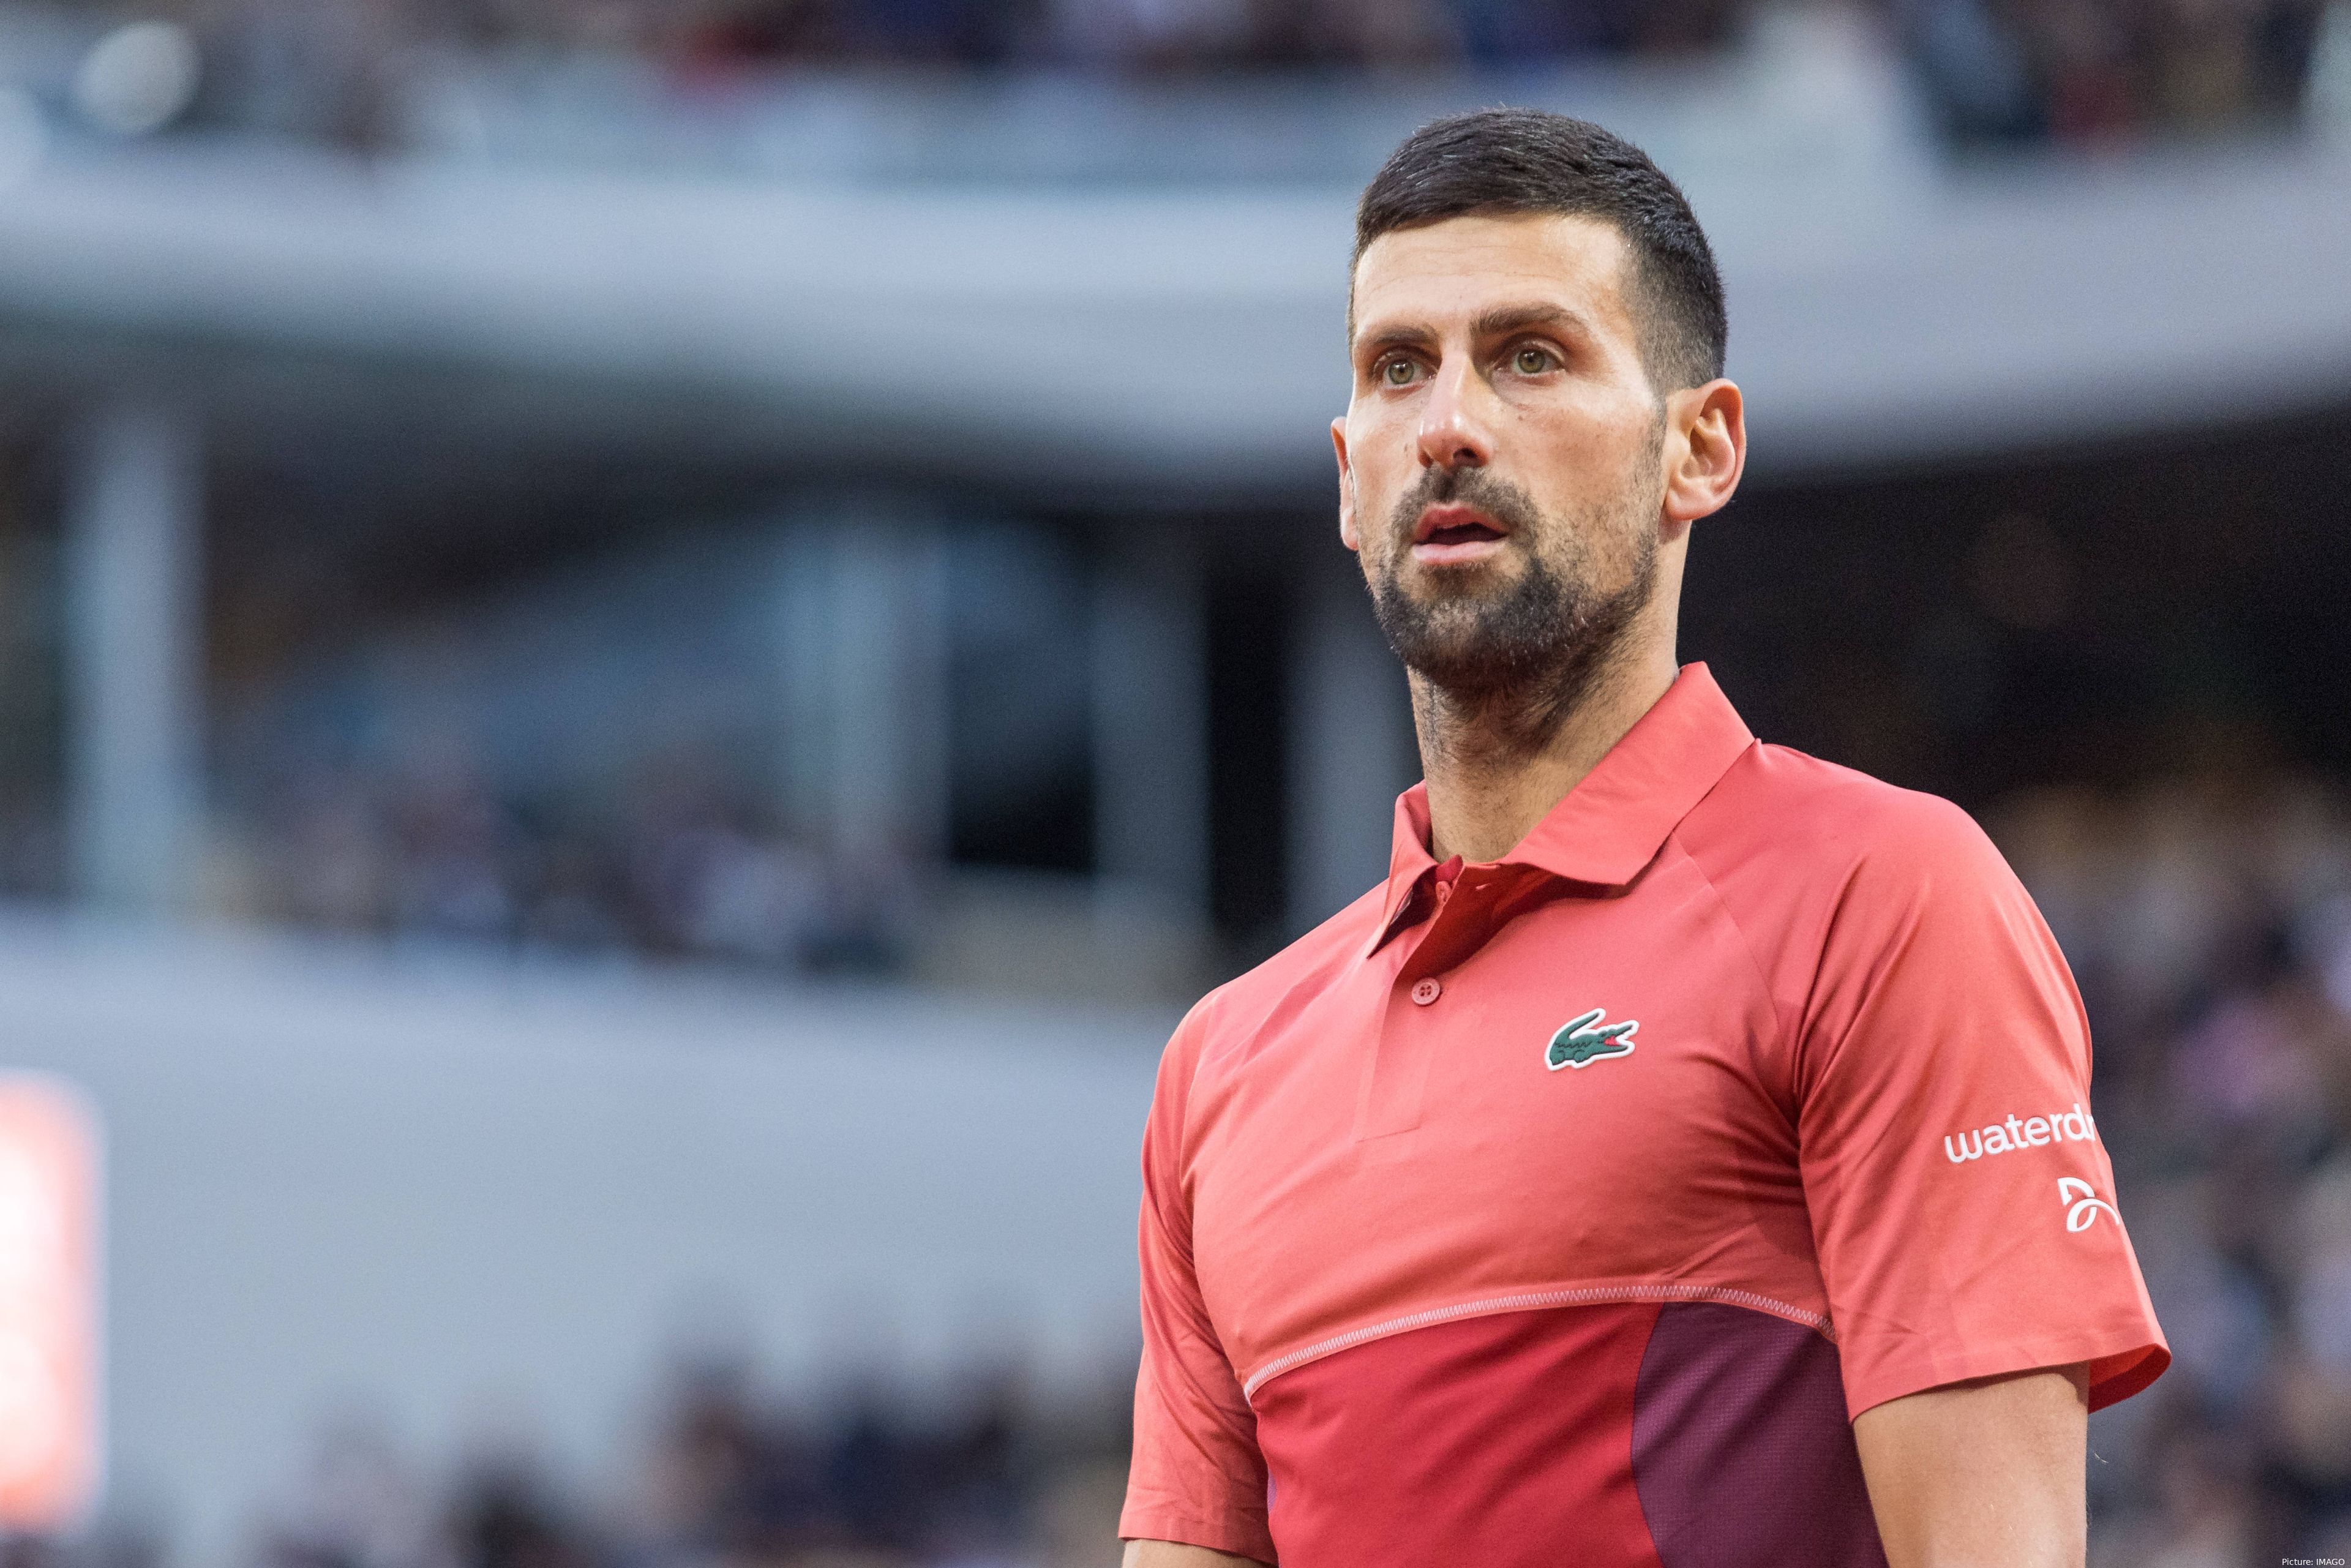 Novak Djokovic faces Lorenzo Musetti who took him the distance in 2021 before a sudden retirement.